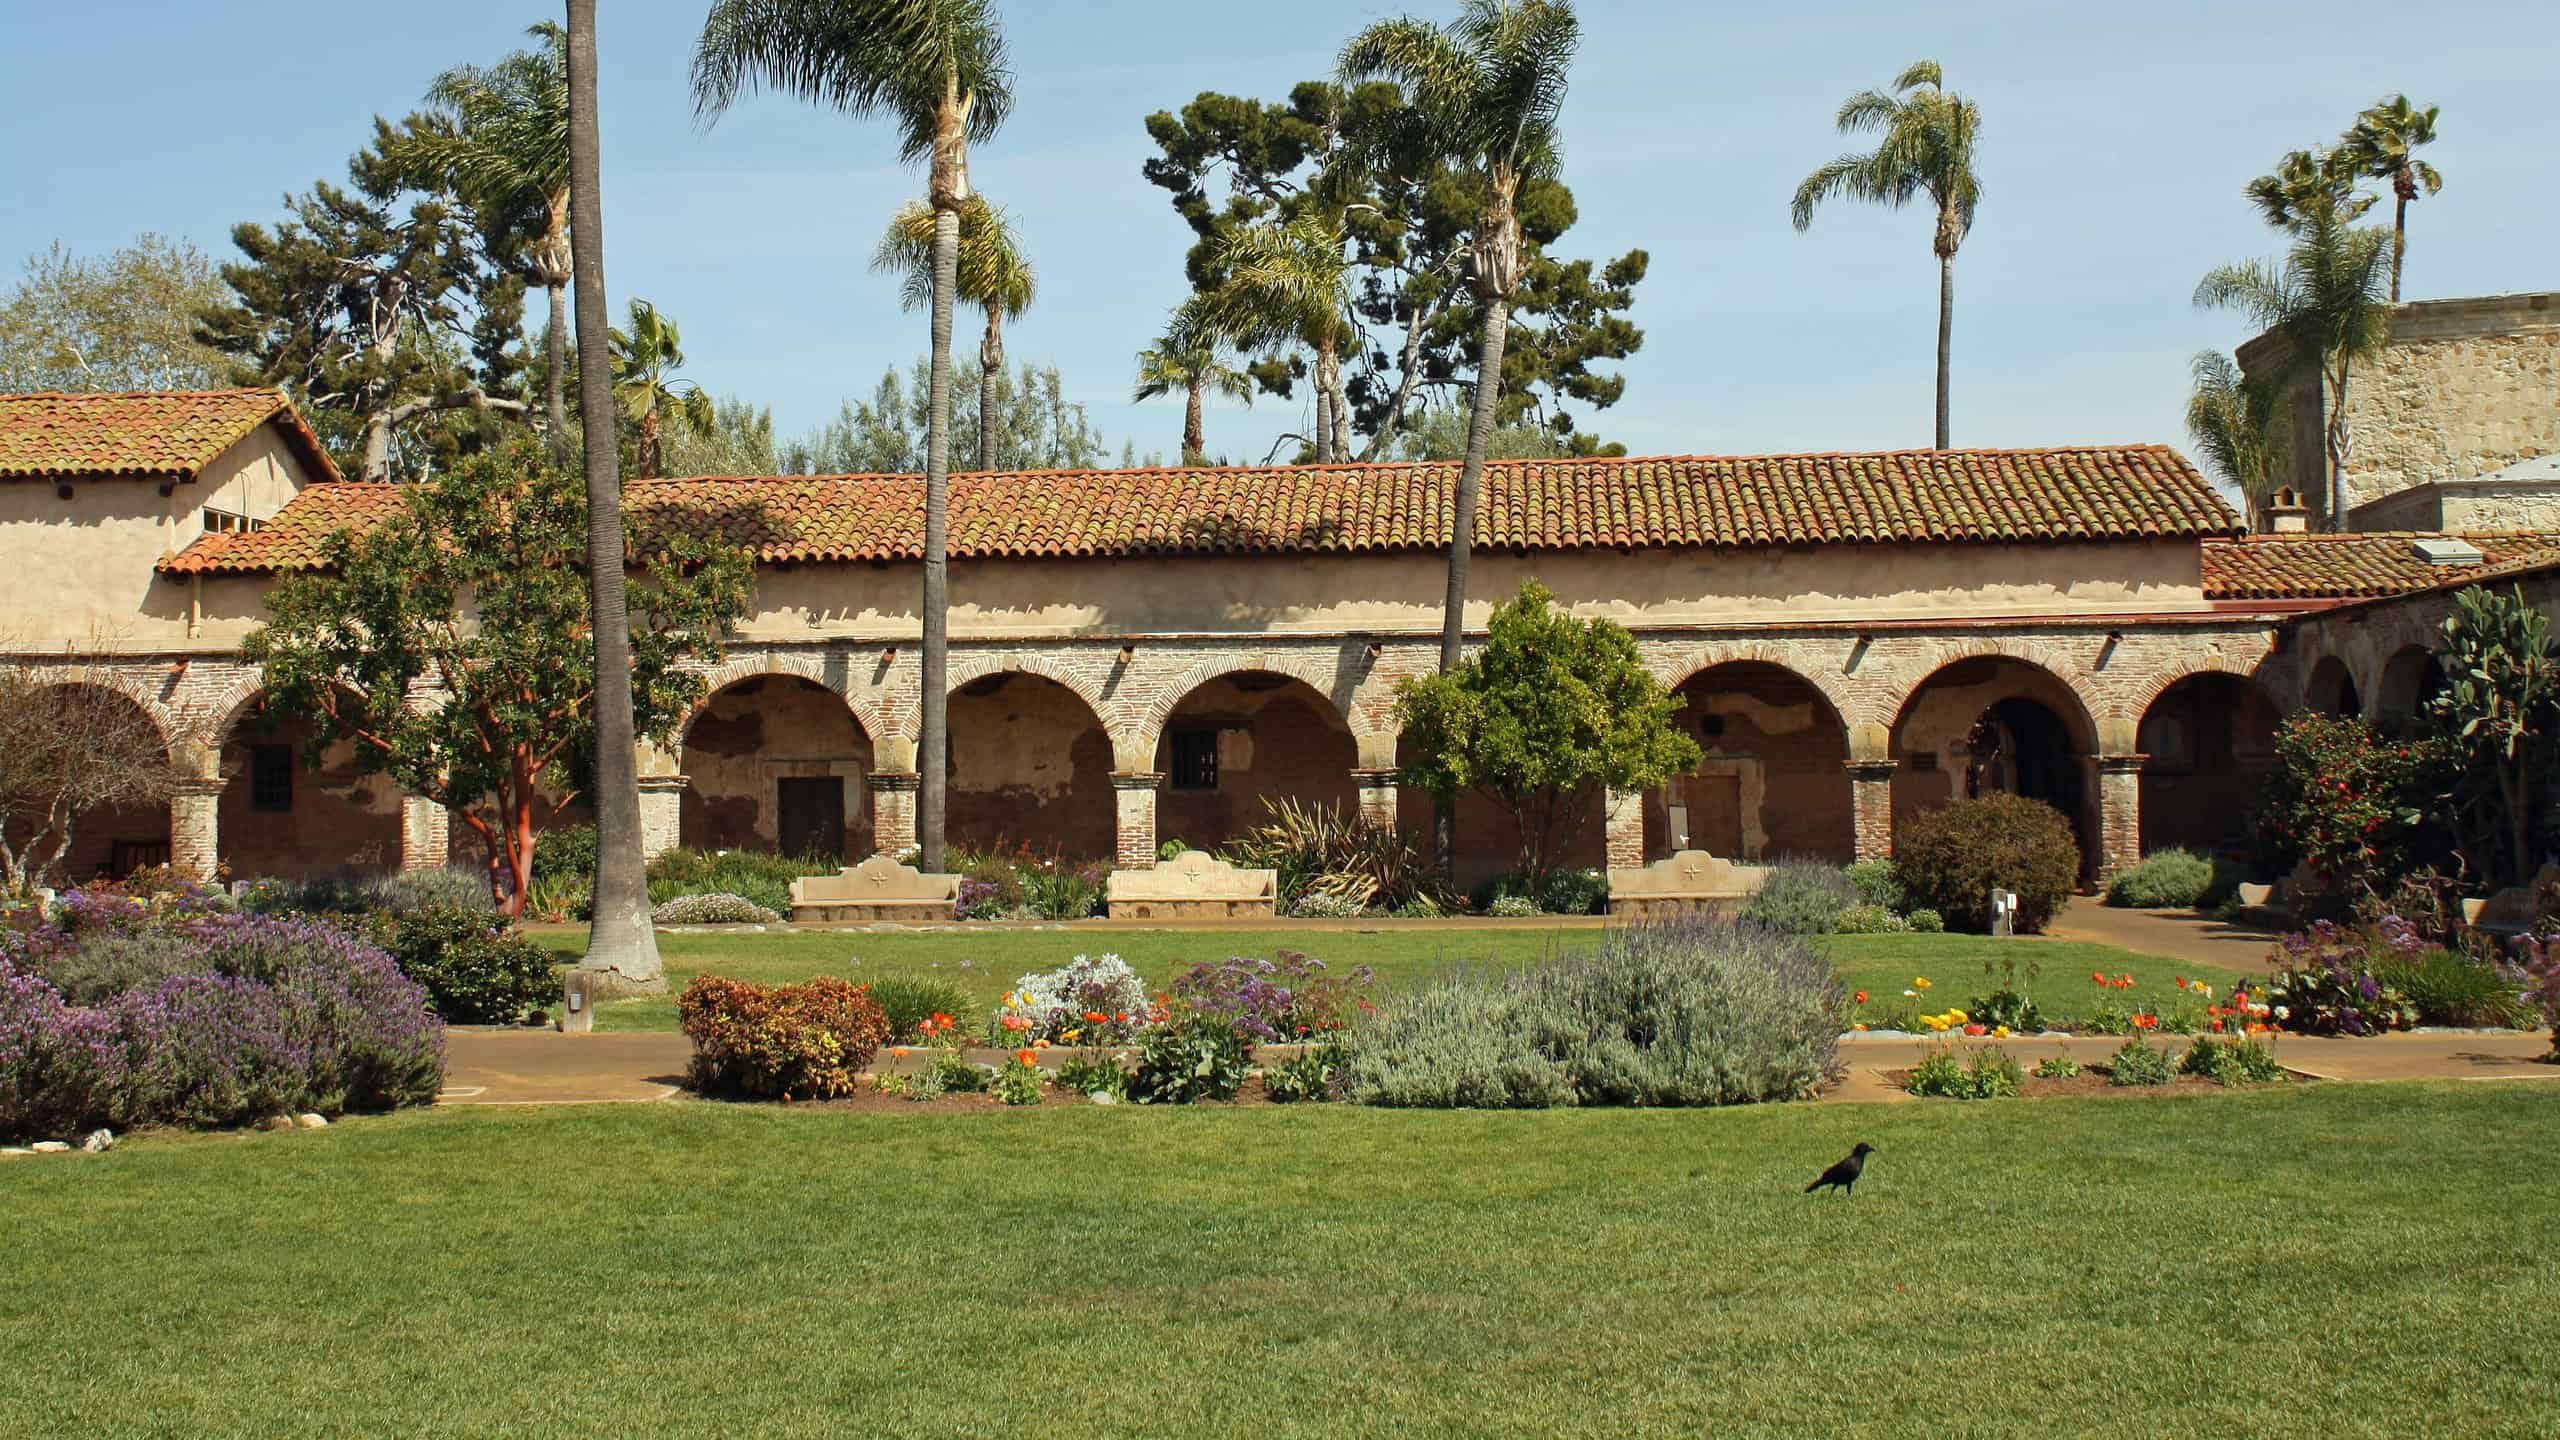 A long building with arches sits between palm trees. 